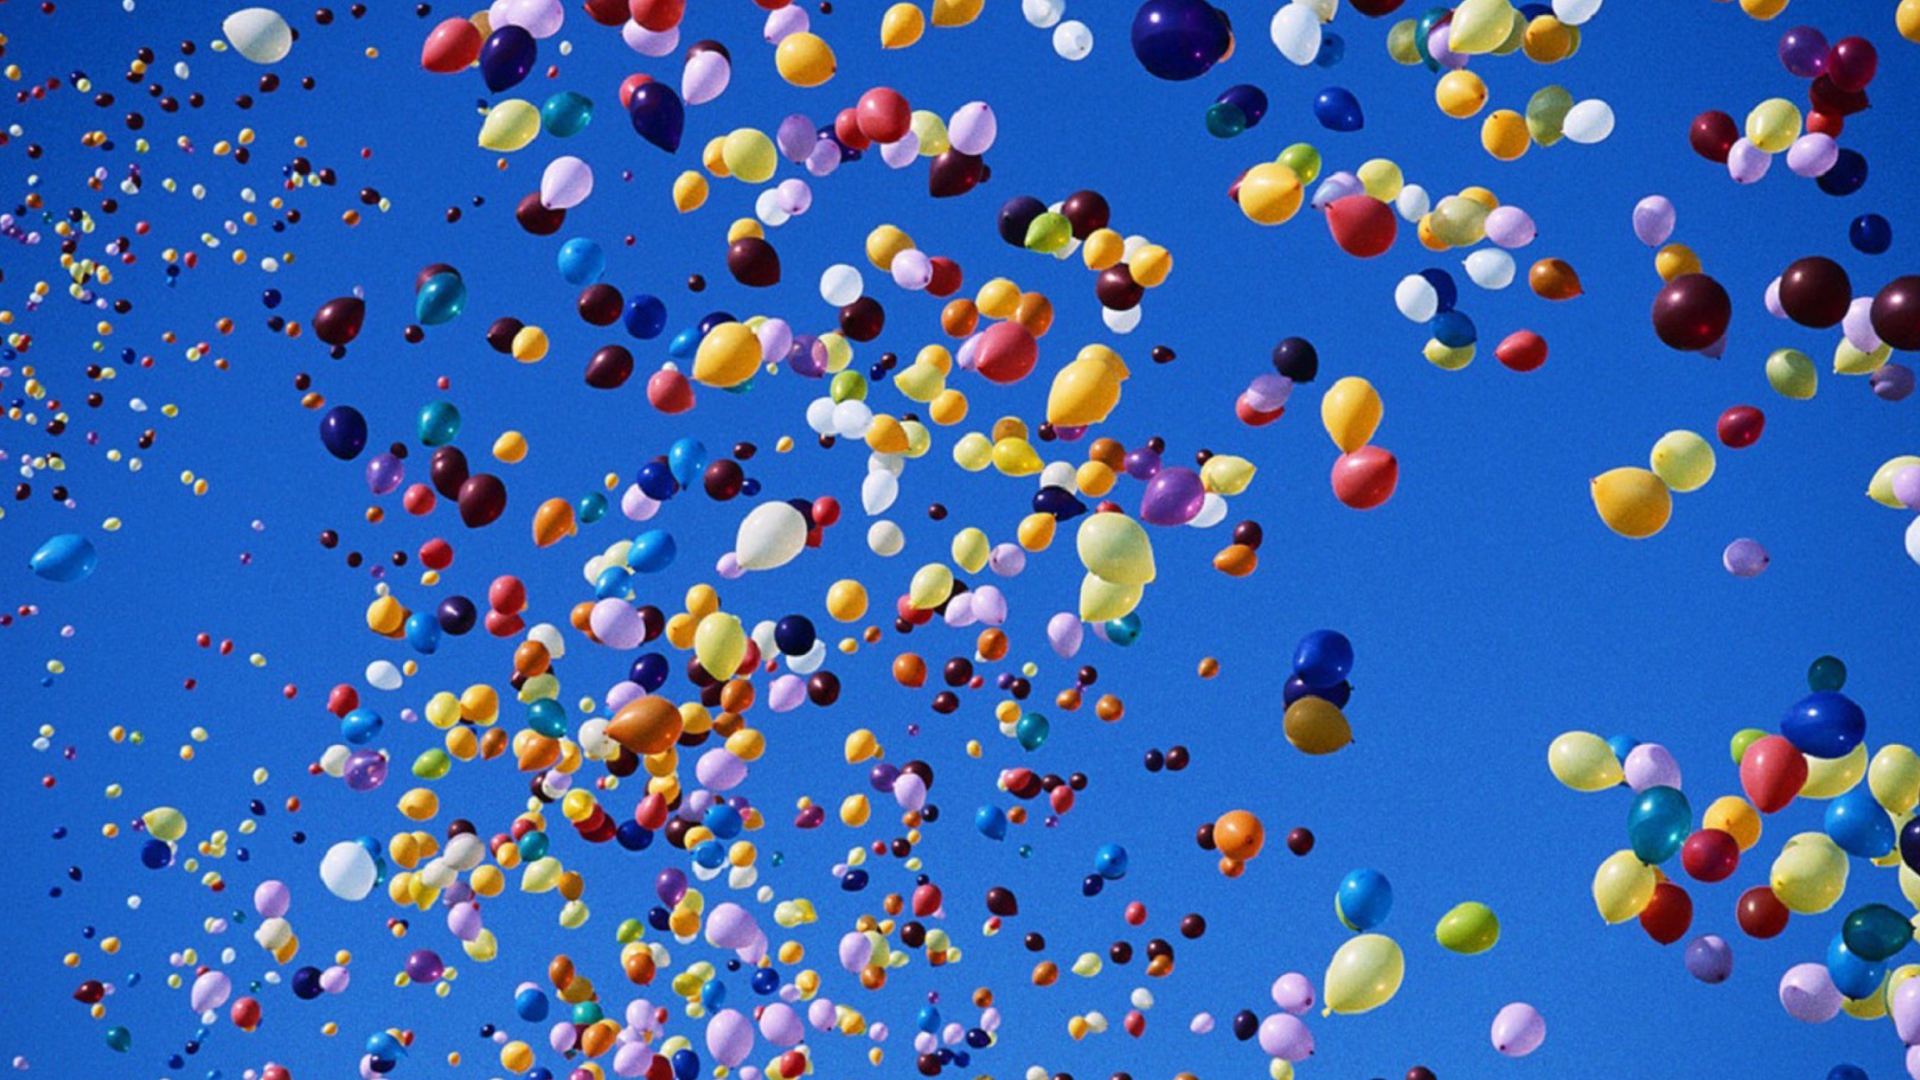 Colorful Balloons In Blue Sky screenshot #1 1920x1080